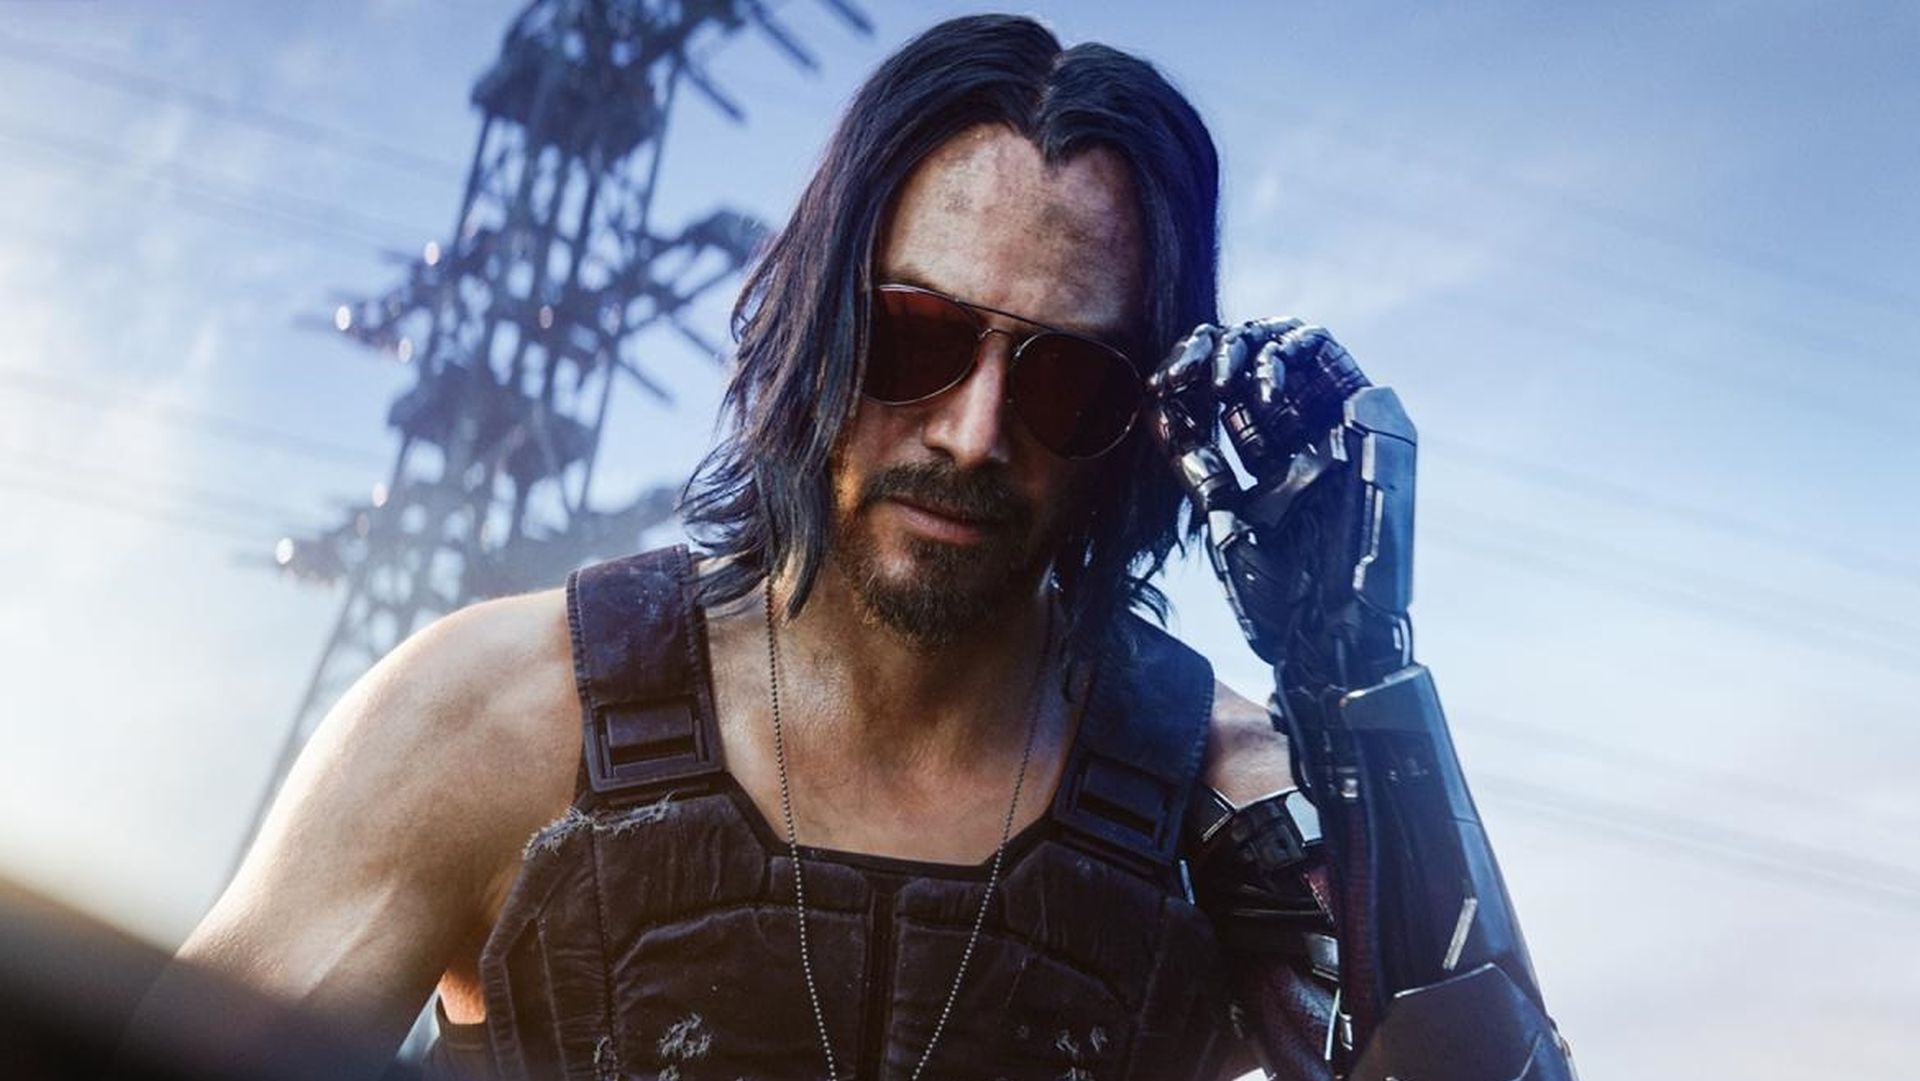 Attention: Cyberpunk 2077 may cause epileptic seizures